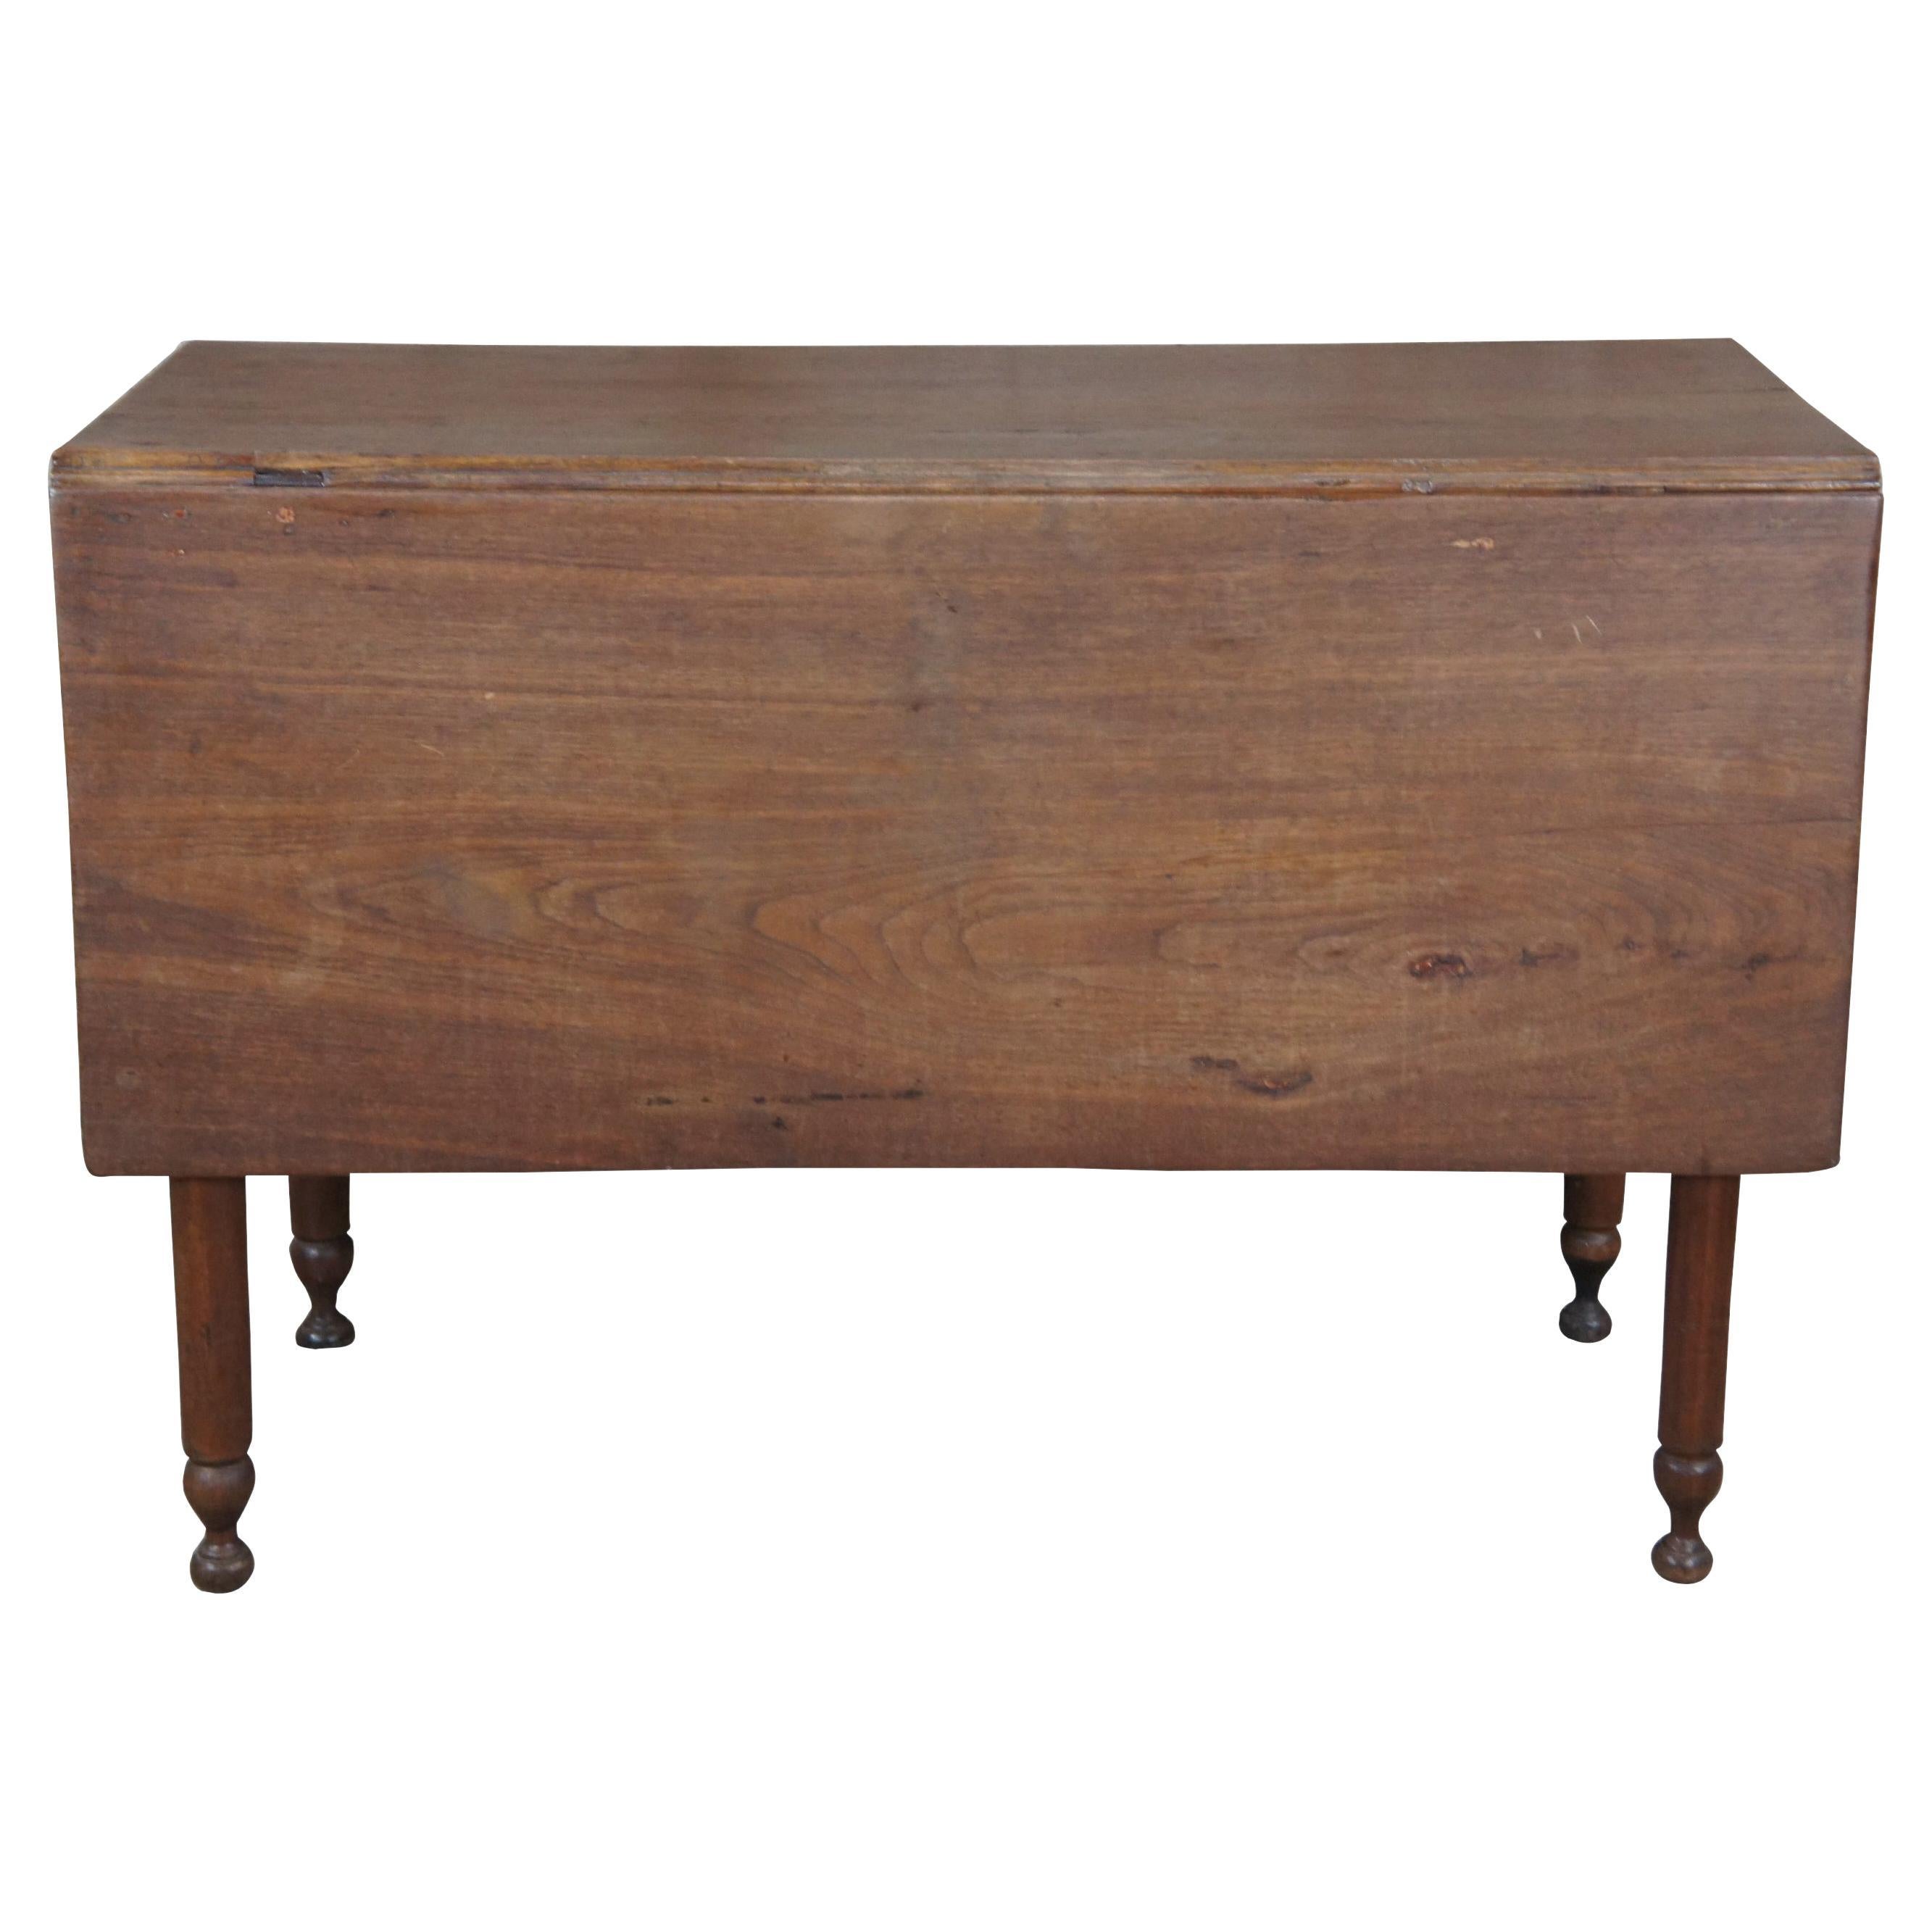 Antique Early American Walnut Drop Leaf Farmhouse Dining Table Entry Console 41" For Sale